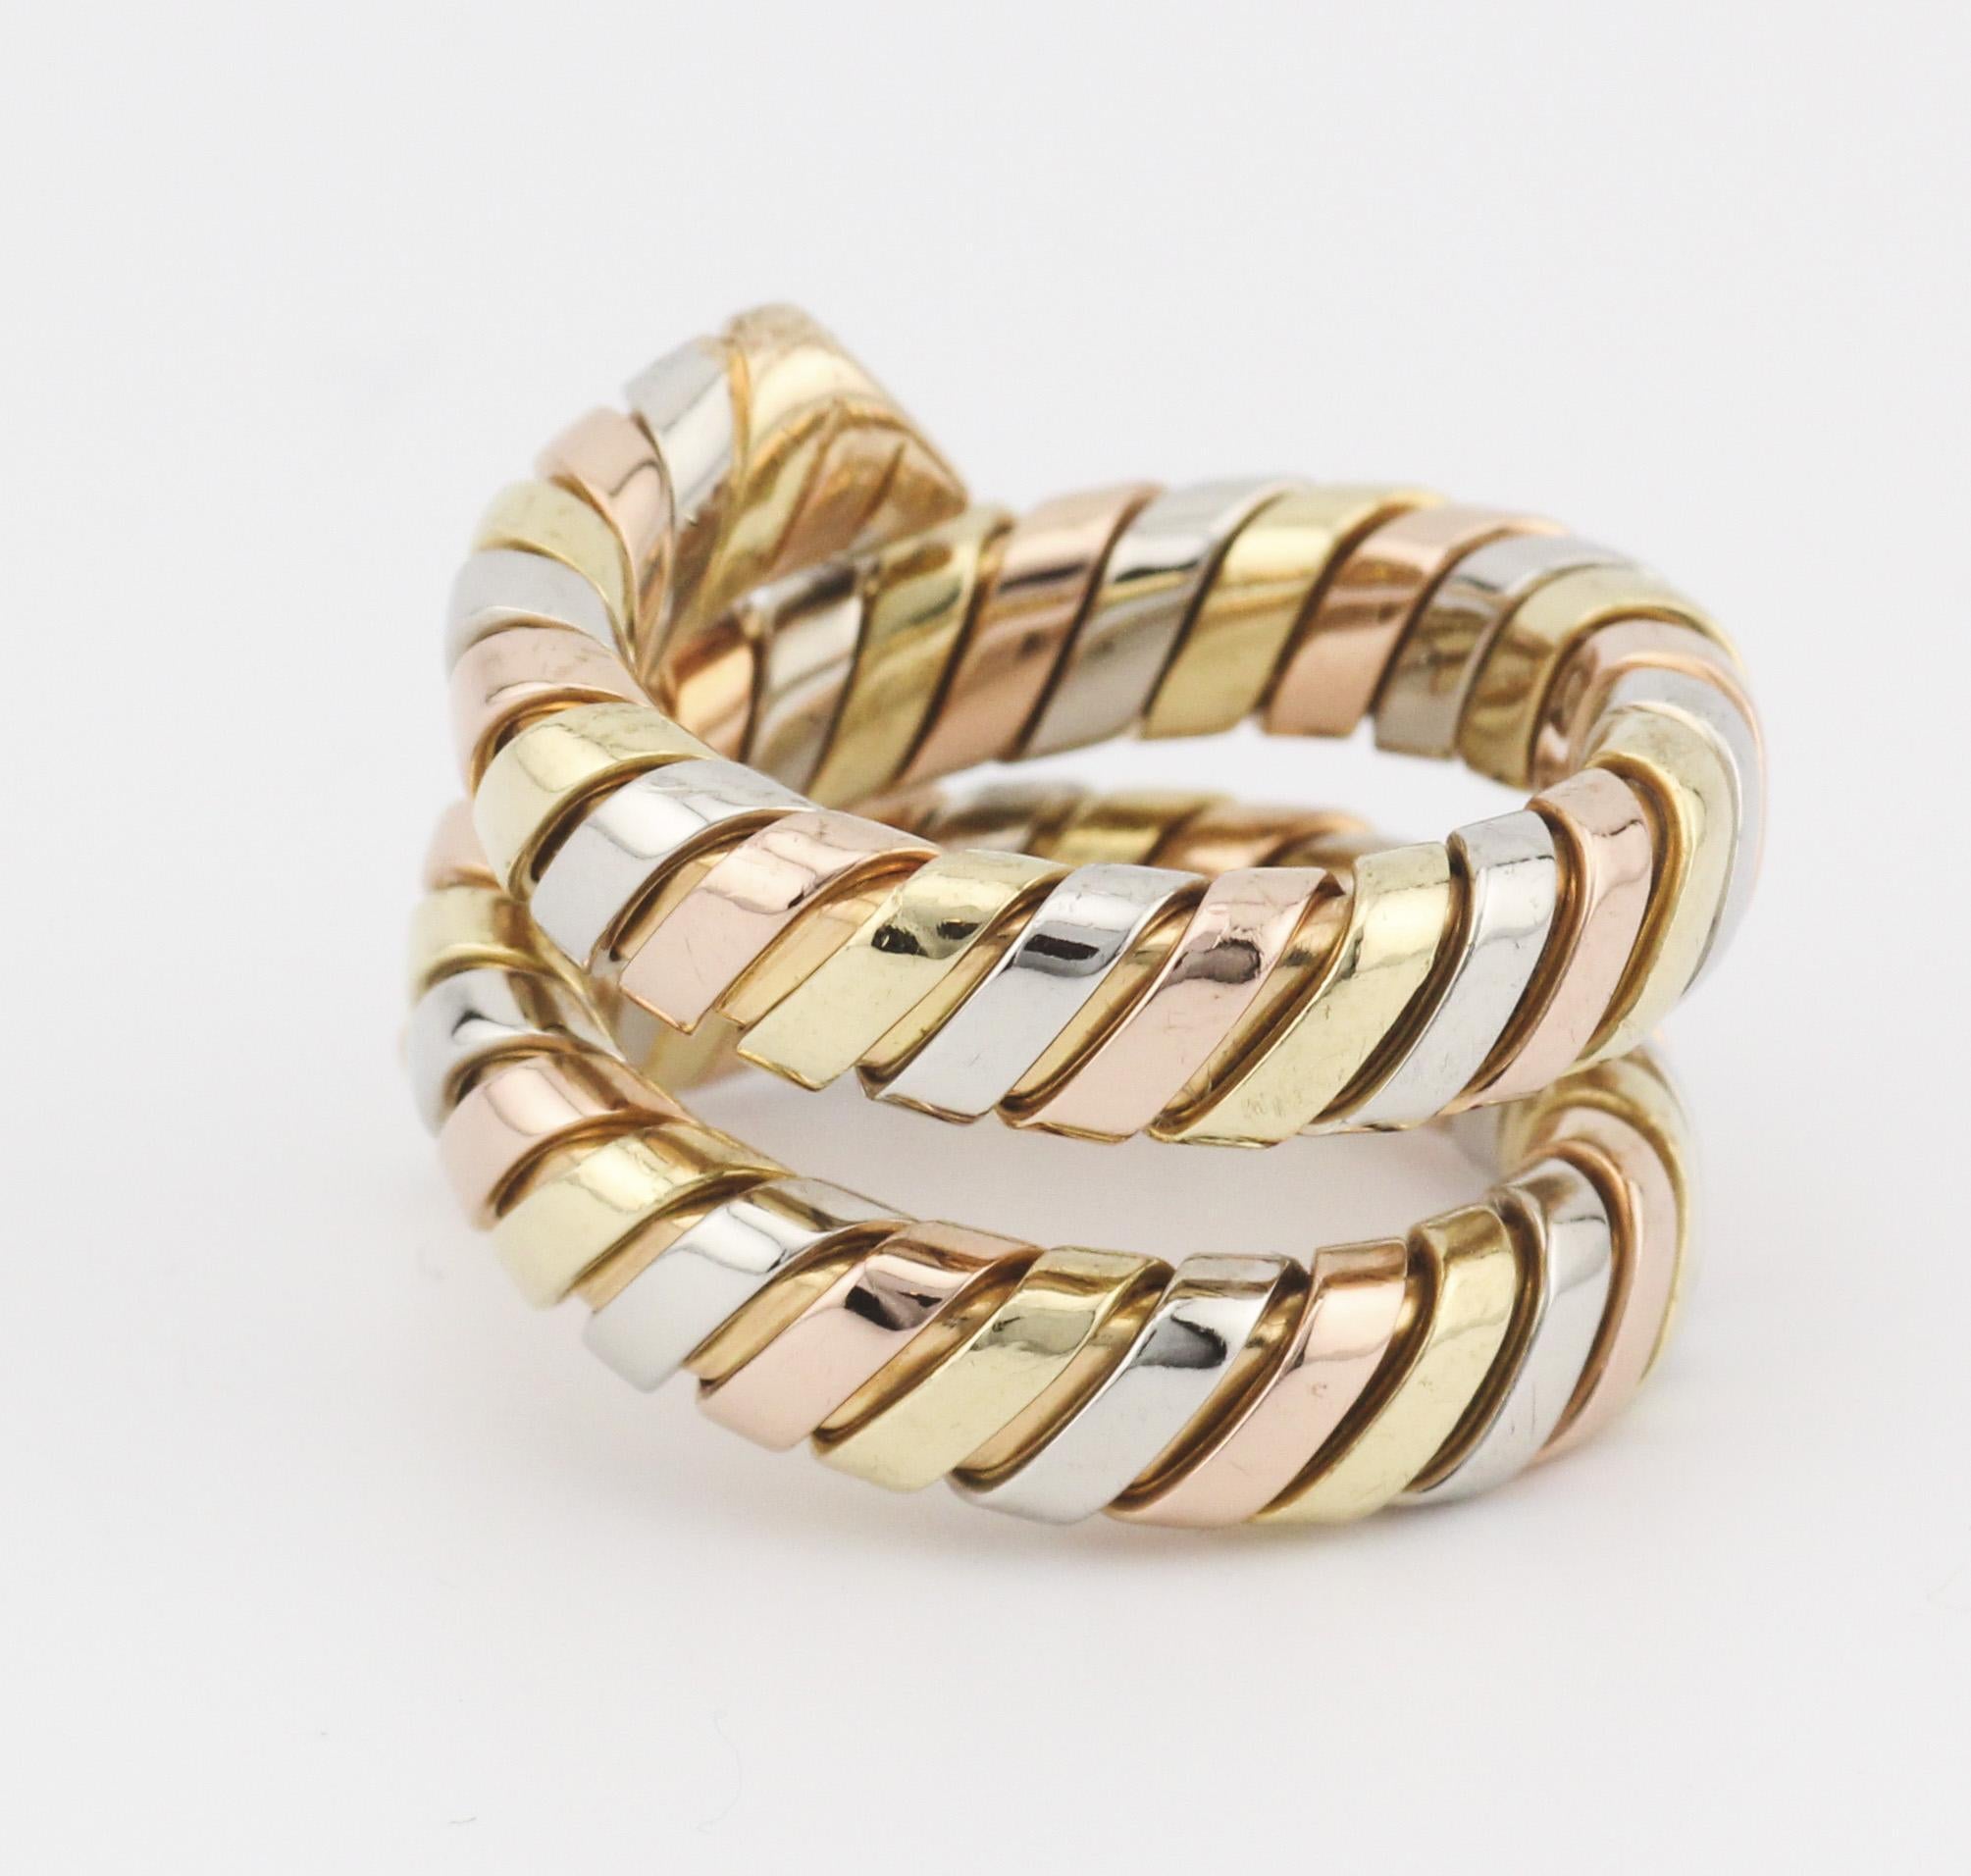 Bulgari Tubogas 3 Color 18K Gold Flexible Snake Ring Size 6.5 In Good Condition For Sale In Bellmore, NY